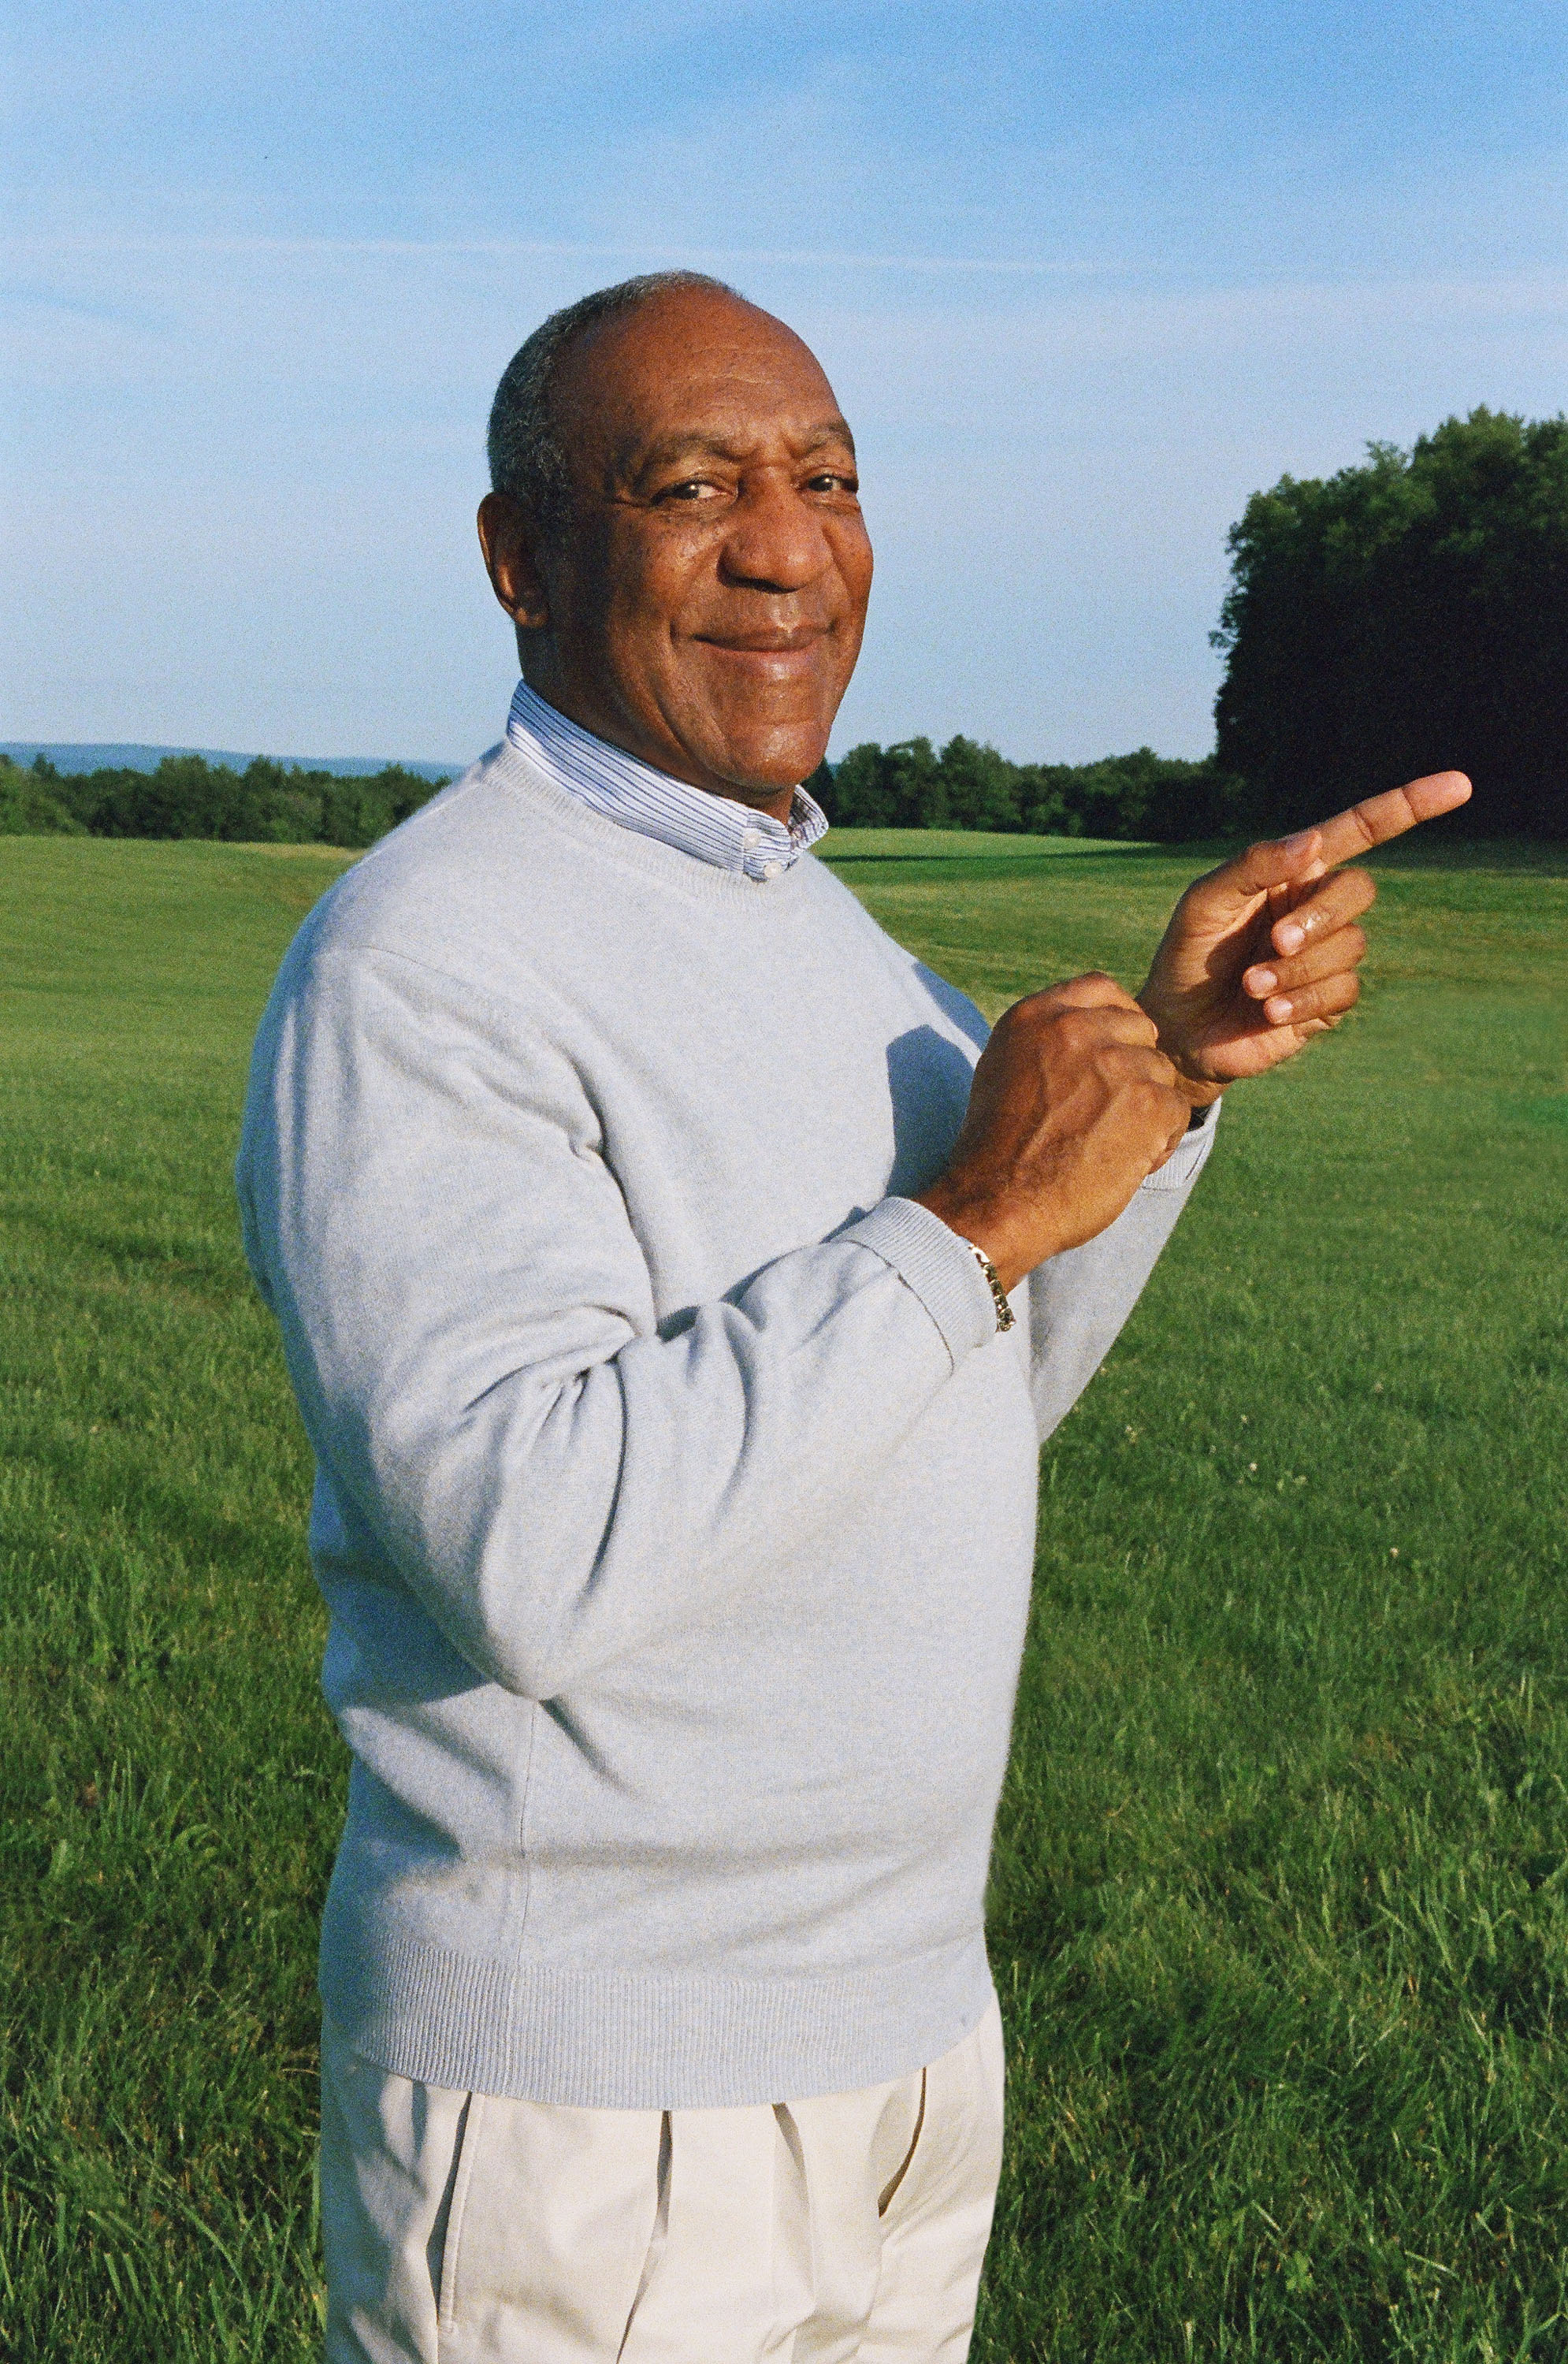 Comedian Bill Cosby tops list of most admired fathers In America according to new poll commissioned by the FOE.